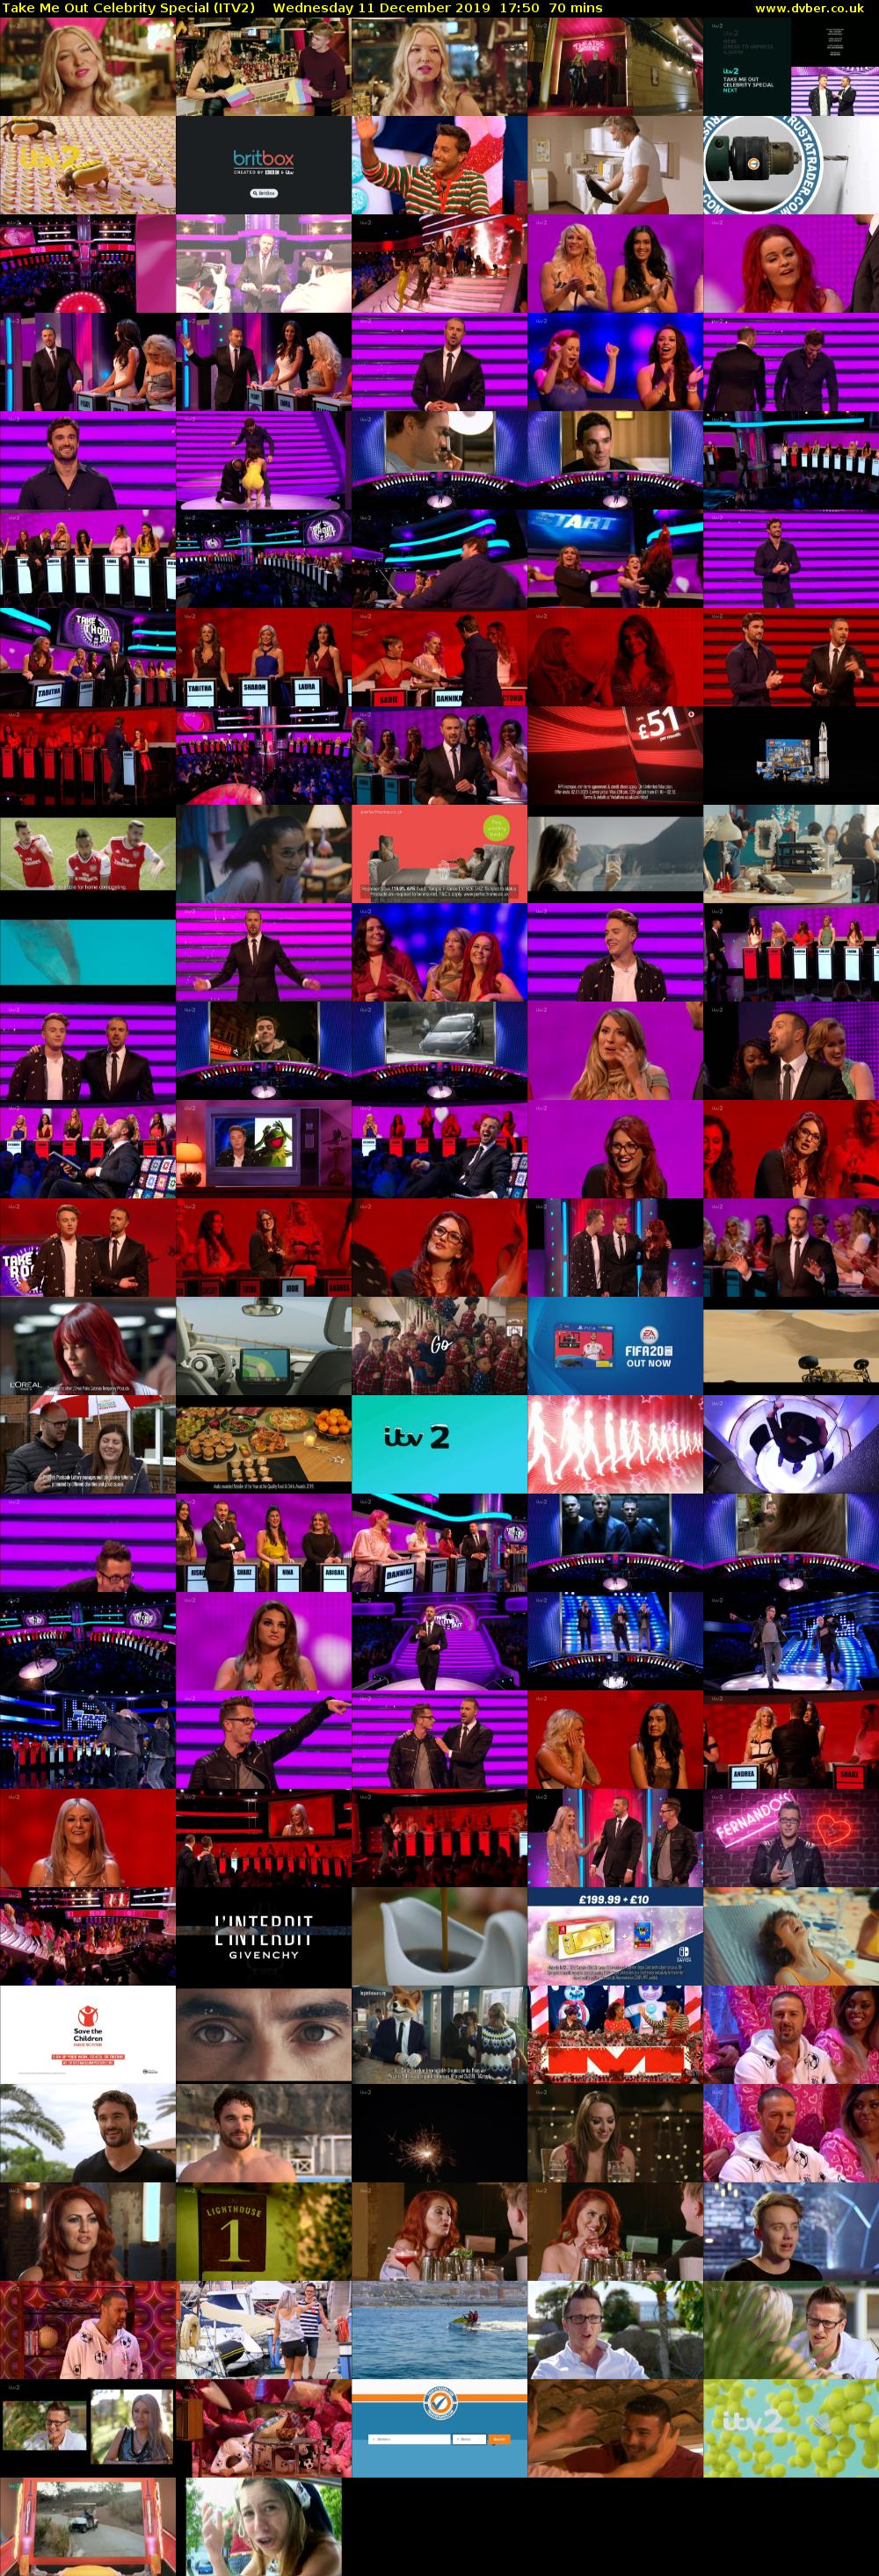 Take Me Out Celebrity Special (ITV2) Wednesday 11 December 2019 17:50 - 19:00